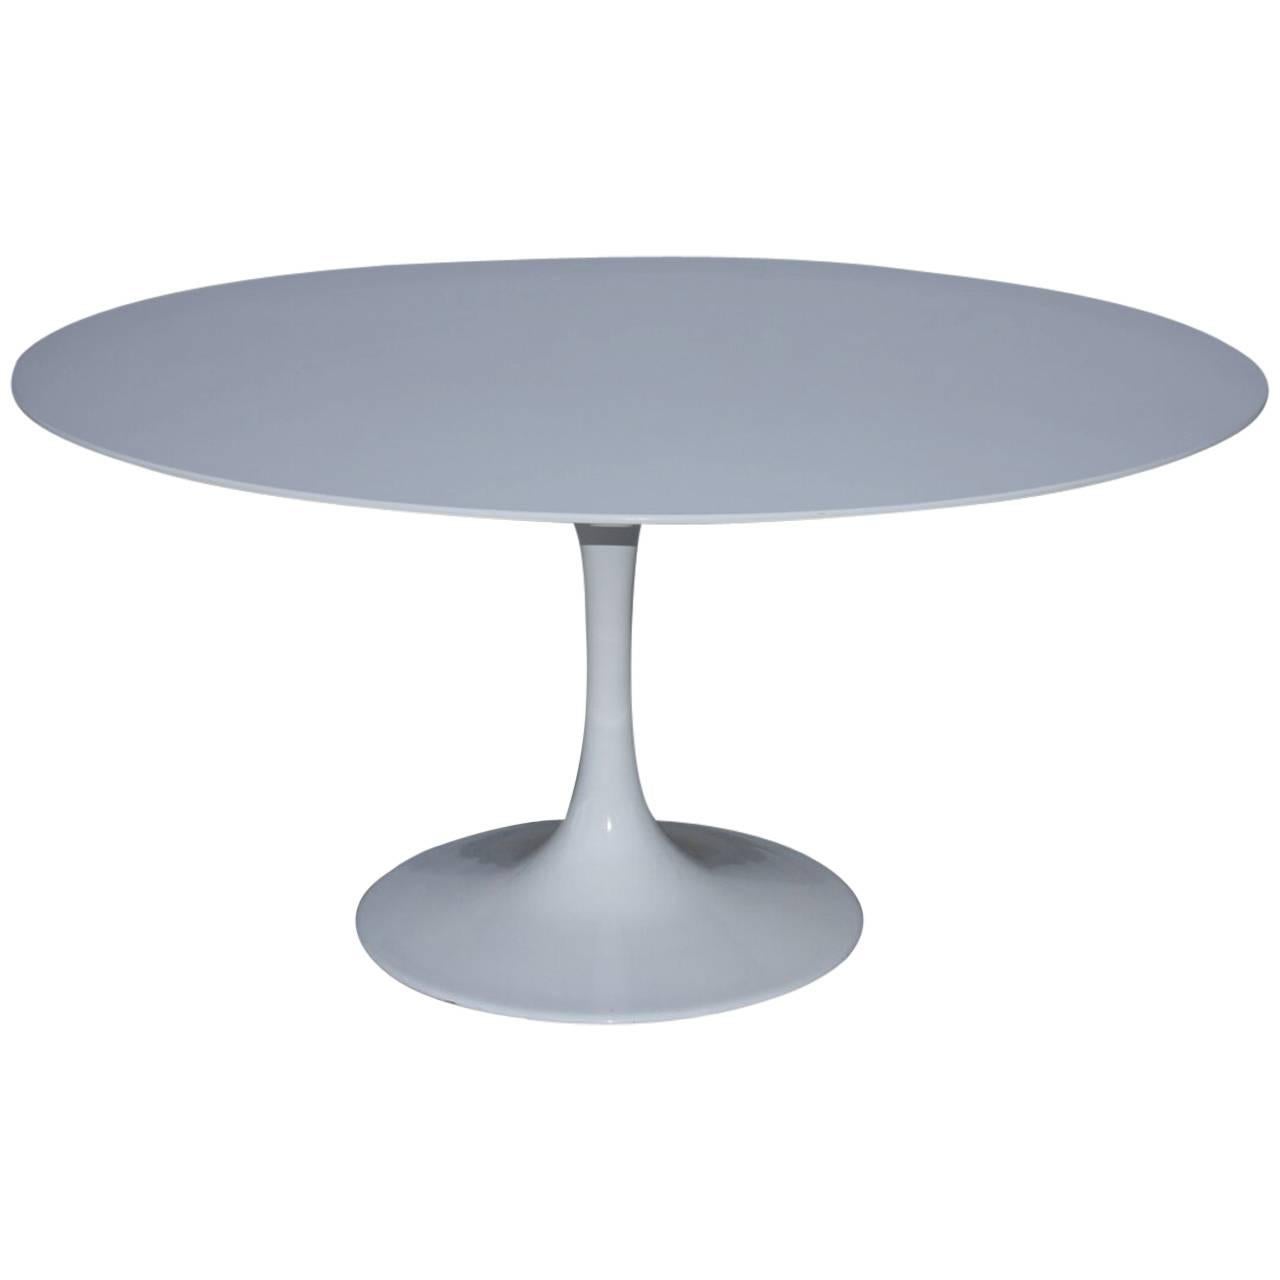 Contemporary High-Gloss White Eero Saarinen Style Tulip Table For Sale